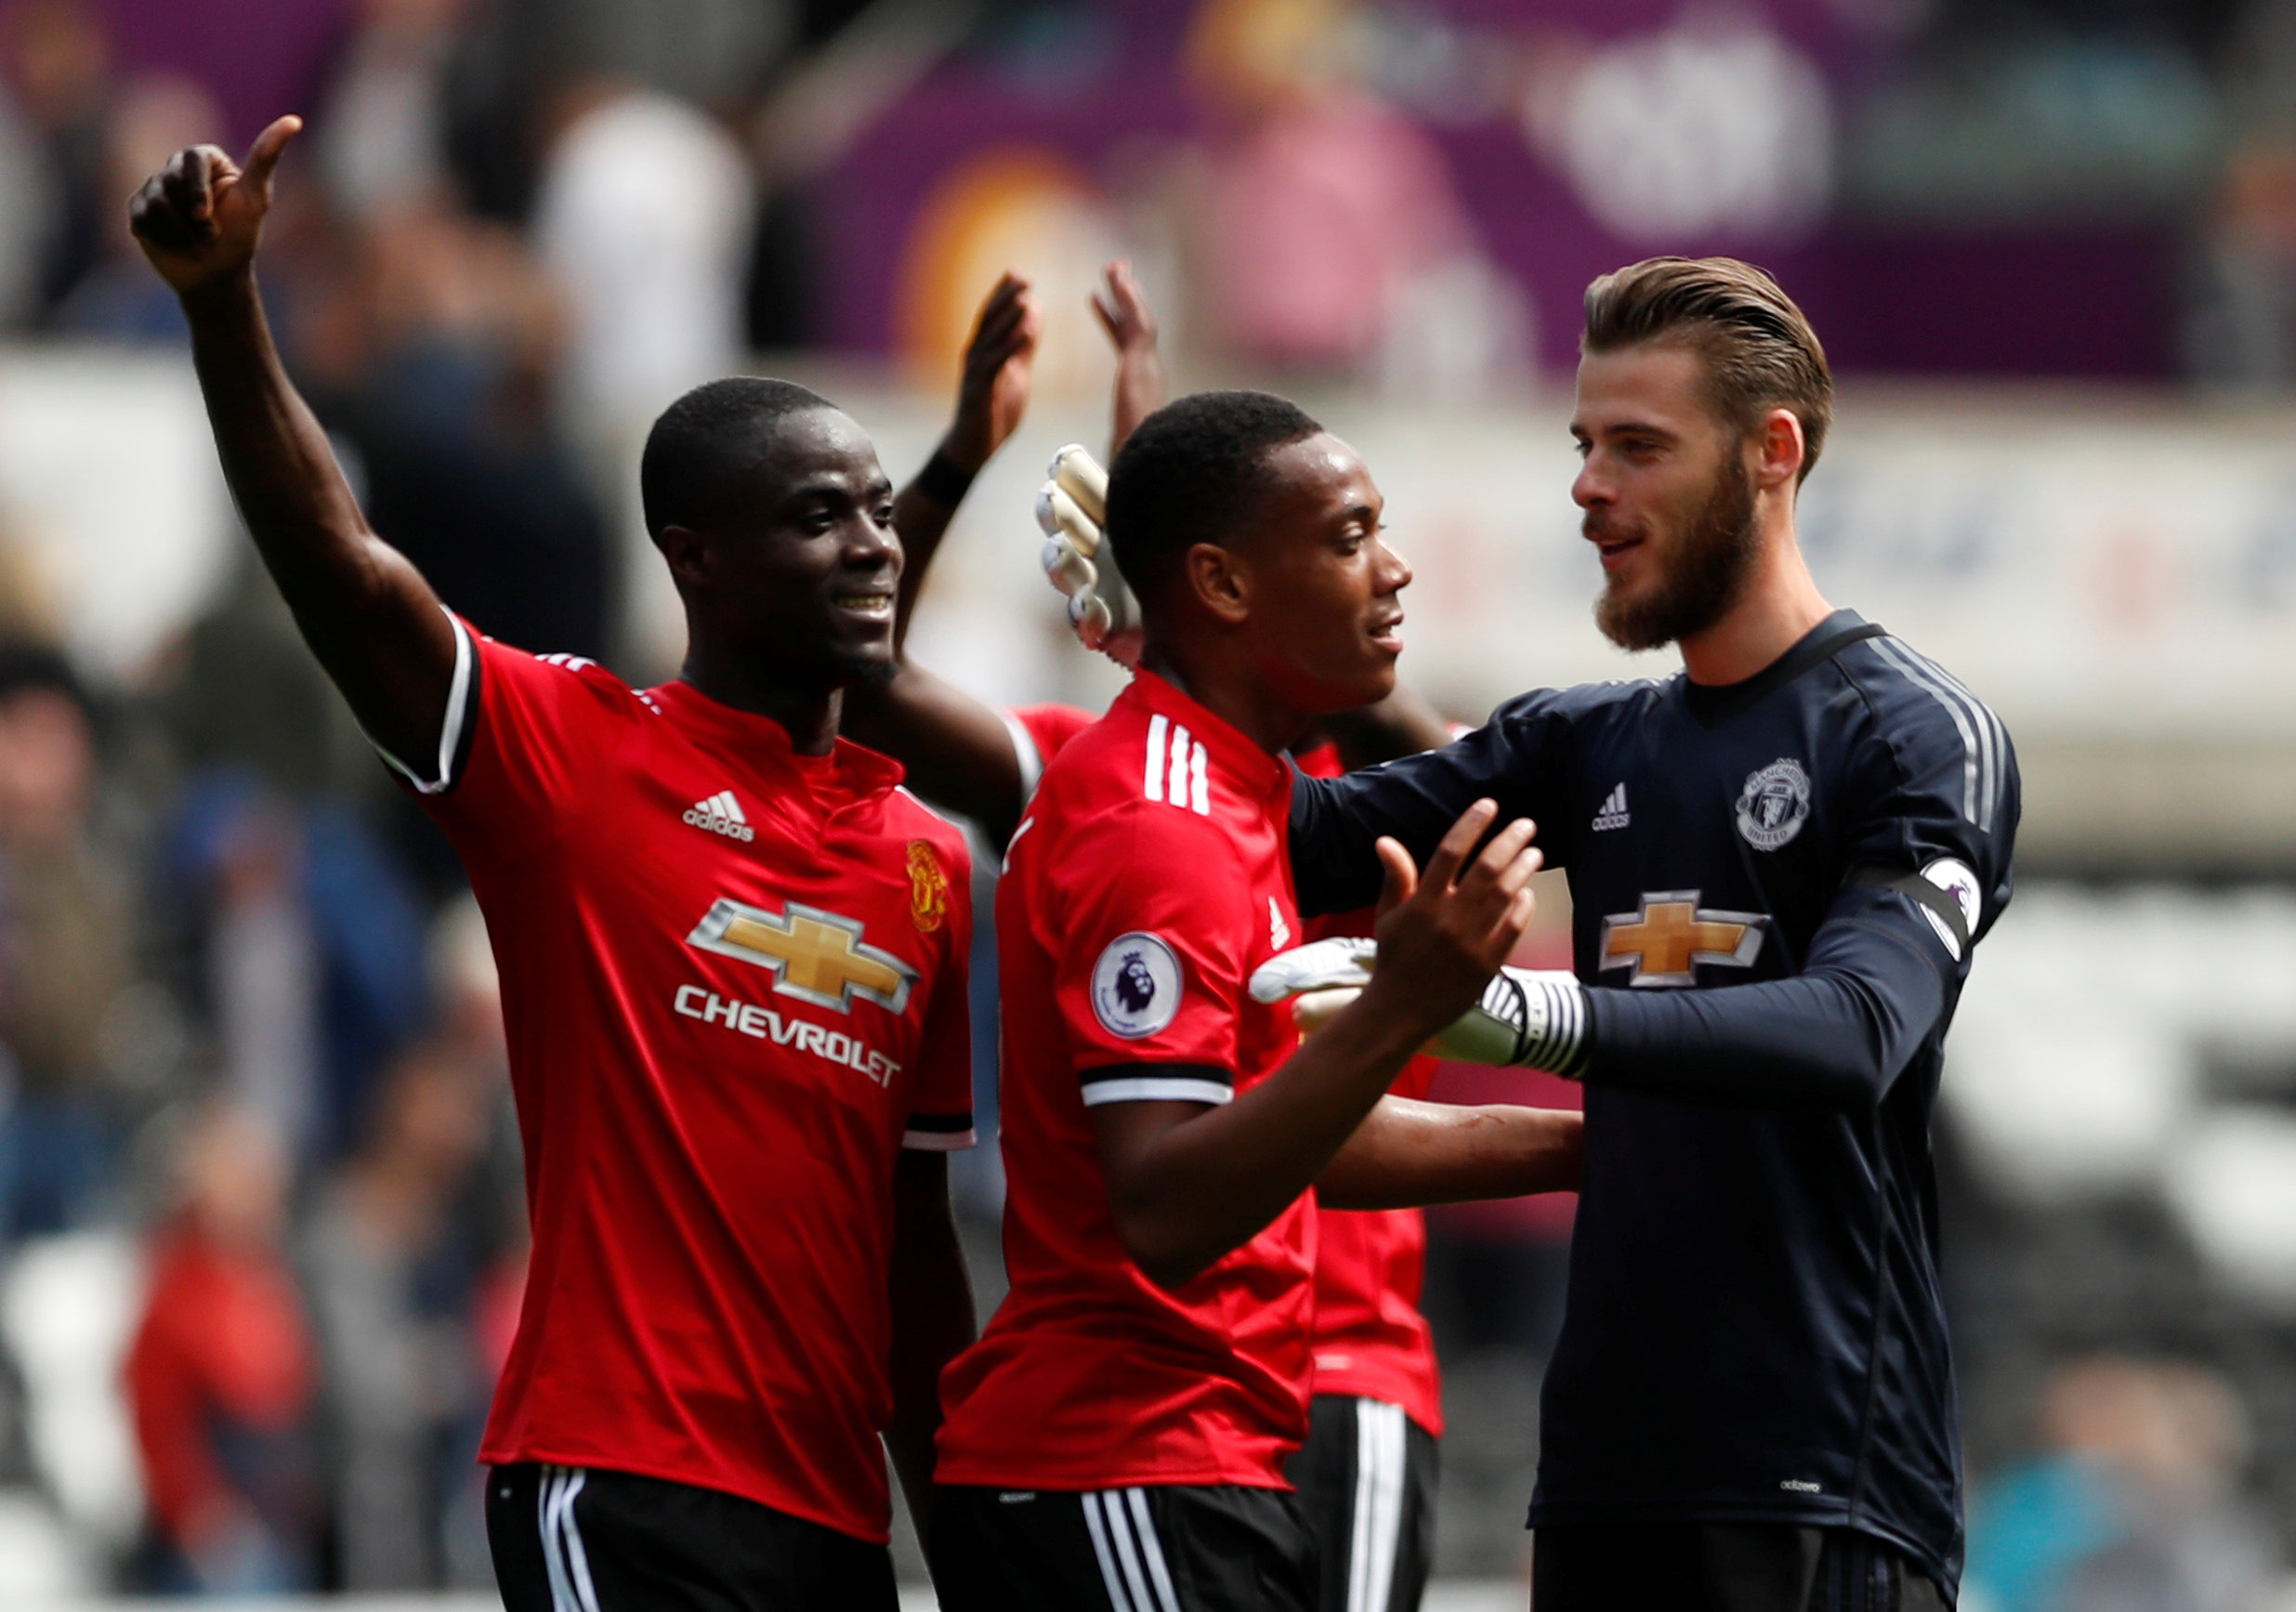 Football: Man United oozing confidence after handing out another mauling